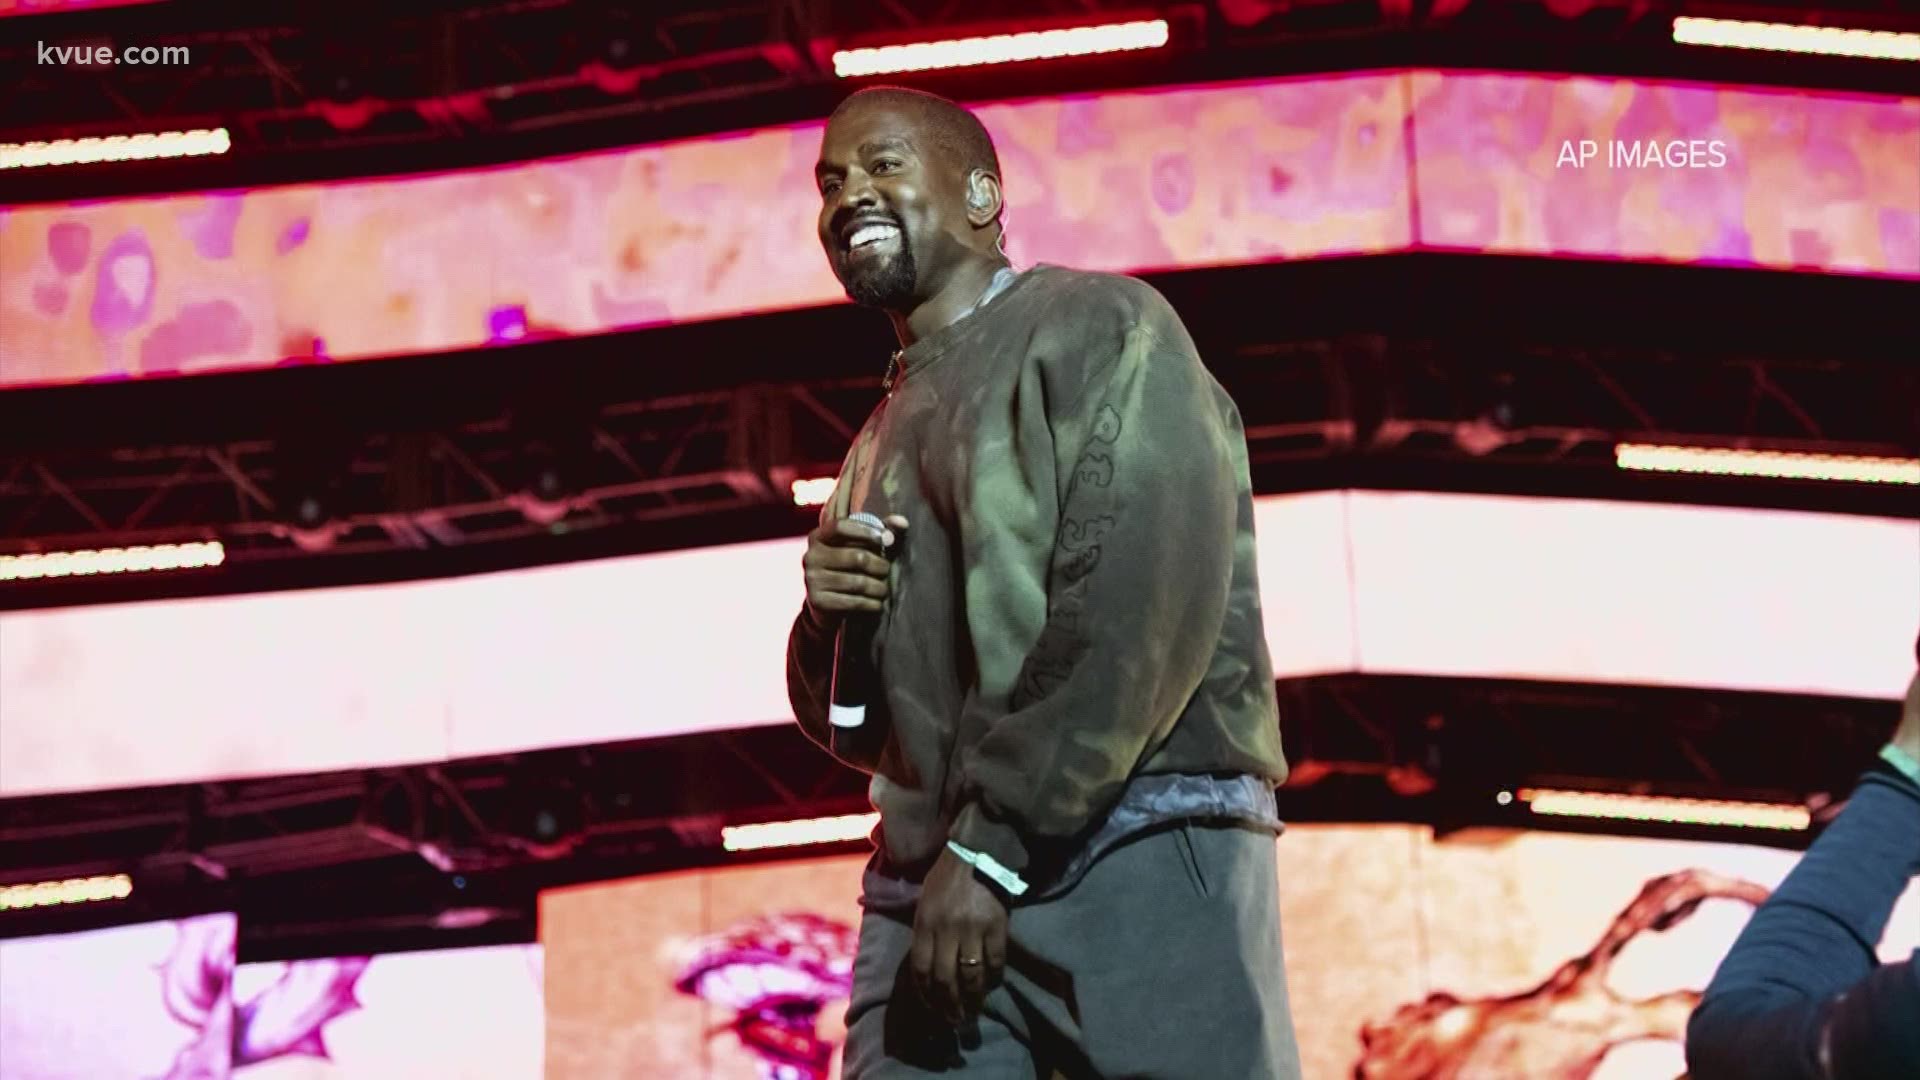 An Austin law firm is suing Kanye West's 2020 presidential campaign, saying it is owed $2 million.